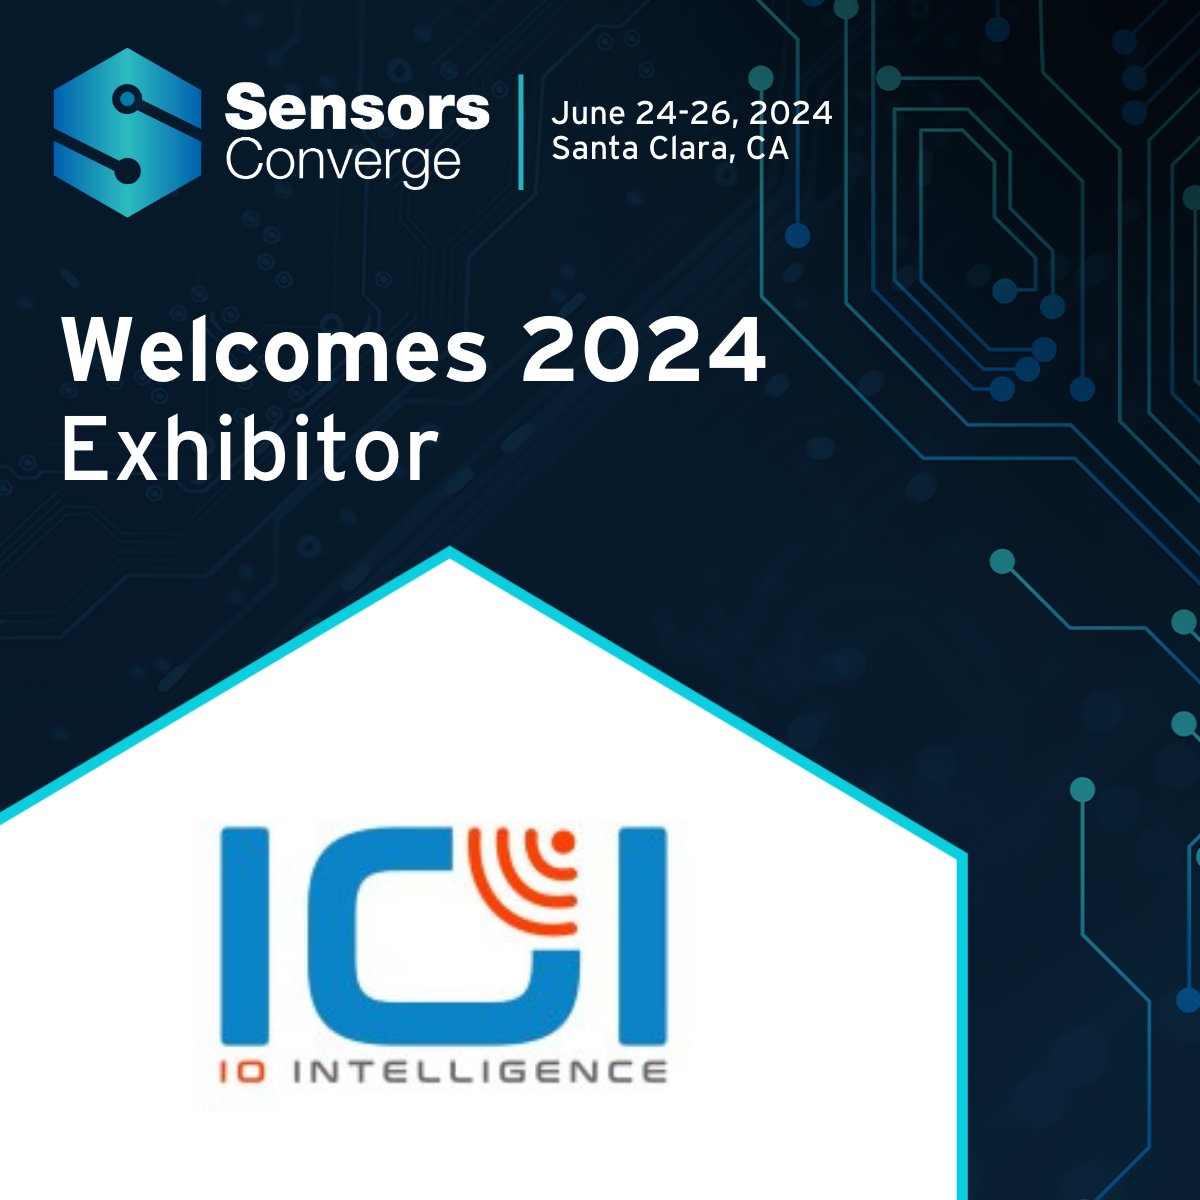 Welcome IO Intelligence to #SensorsConverge! IO Intelligence offers next-generation solutions for WiFi, internet, voice, and data services. Learn more: iointel.com Register now and join us this June 24-26 in Santa Clara! sensorsconverge.com/sensorsconverg… #sensors #IoT